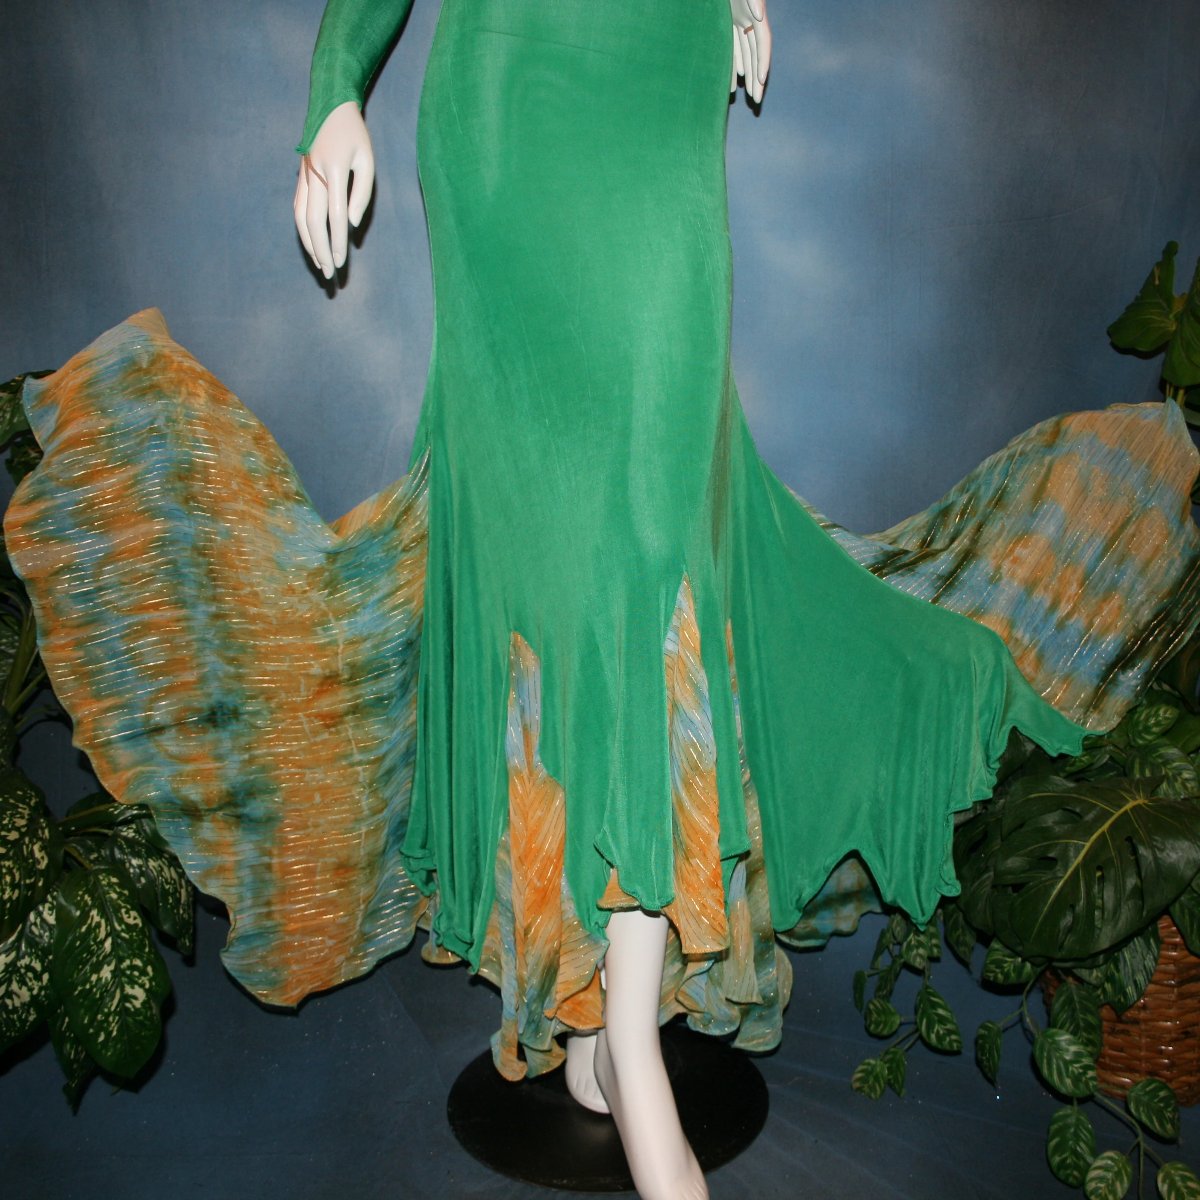 lower view of Gorgeous green ballroom dress created in luxurious solid slinky fabric with printed chiffon of greens, with gold accents insets. Very full around bottom...can be a beginner ballroom dancer smooth or standard dress.